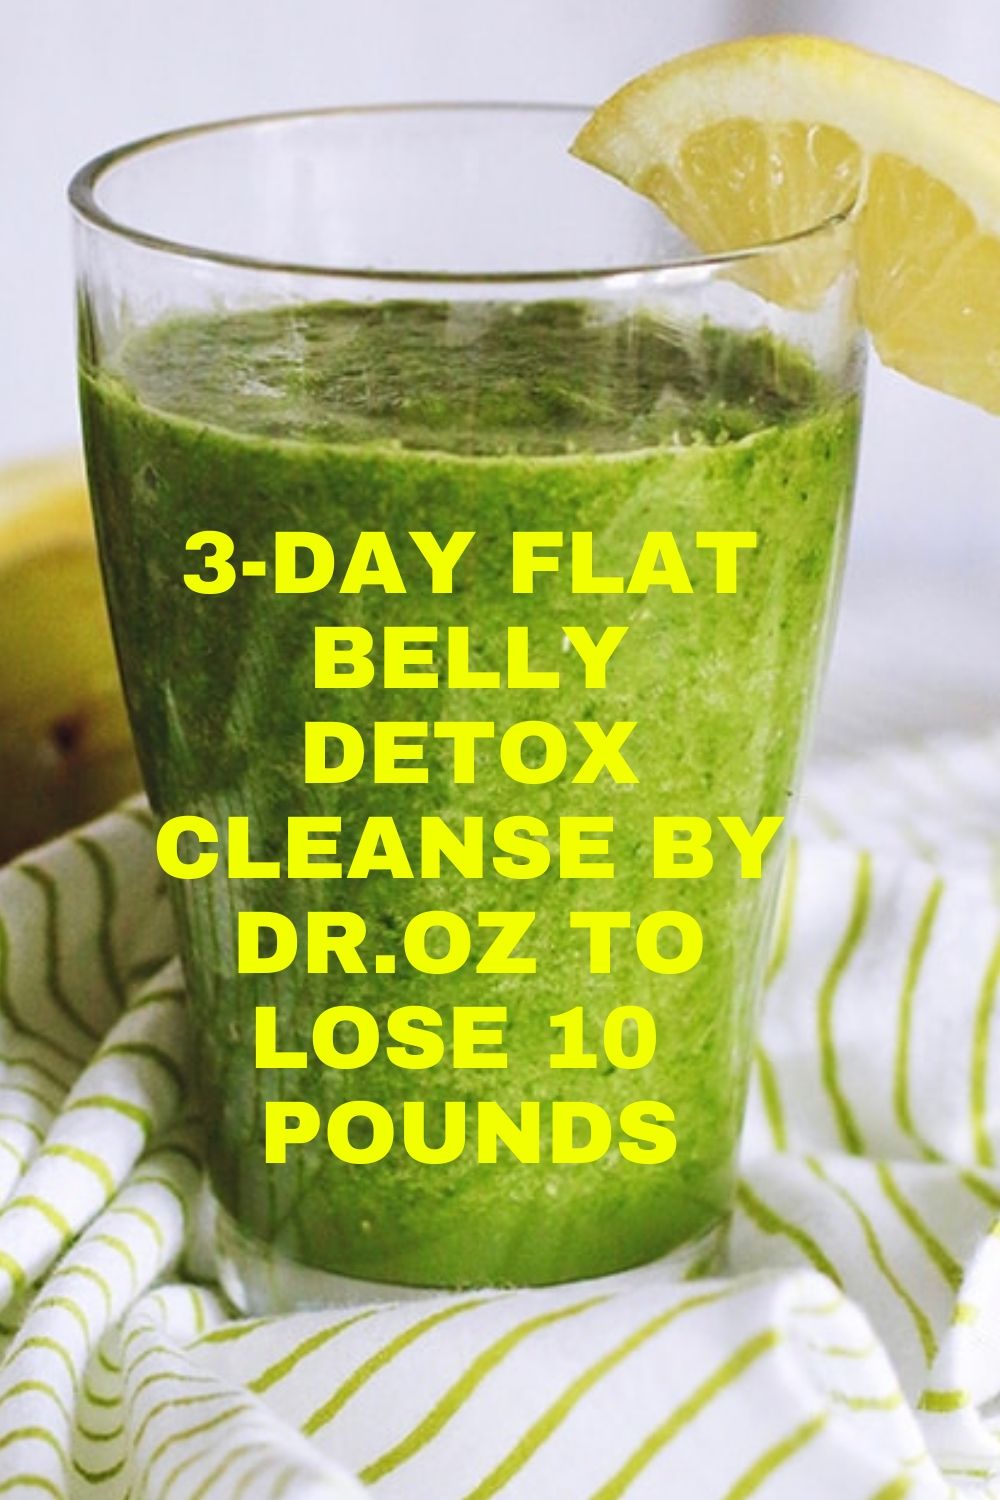 3 Day Flat Belly Detox By Doctor 0z To Lose 10 Pounds | Hello Healthy/